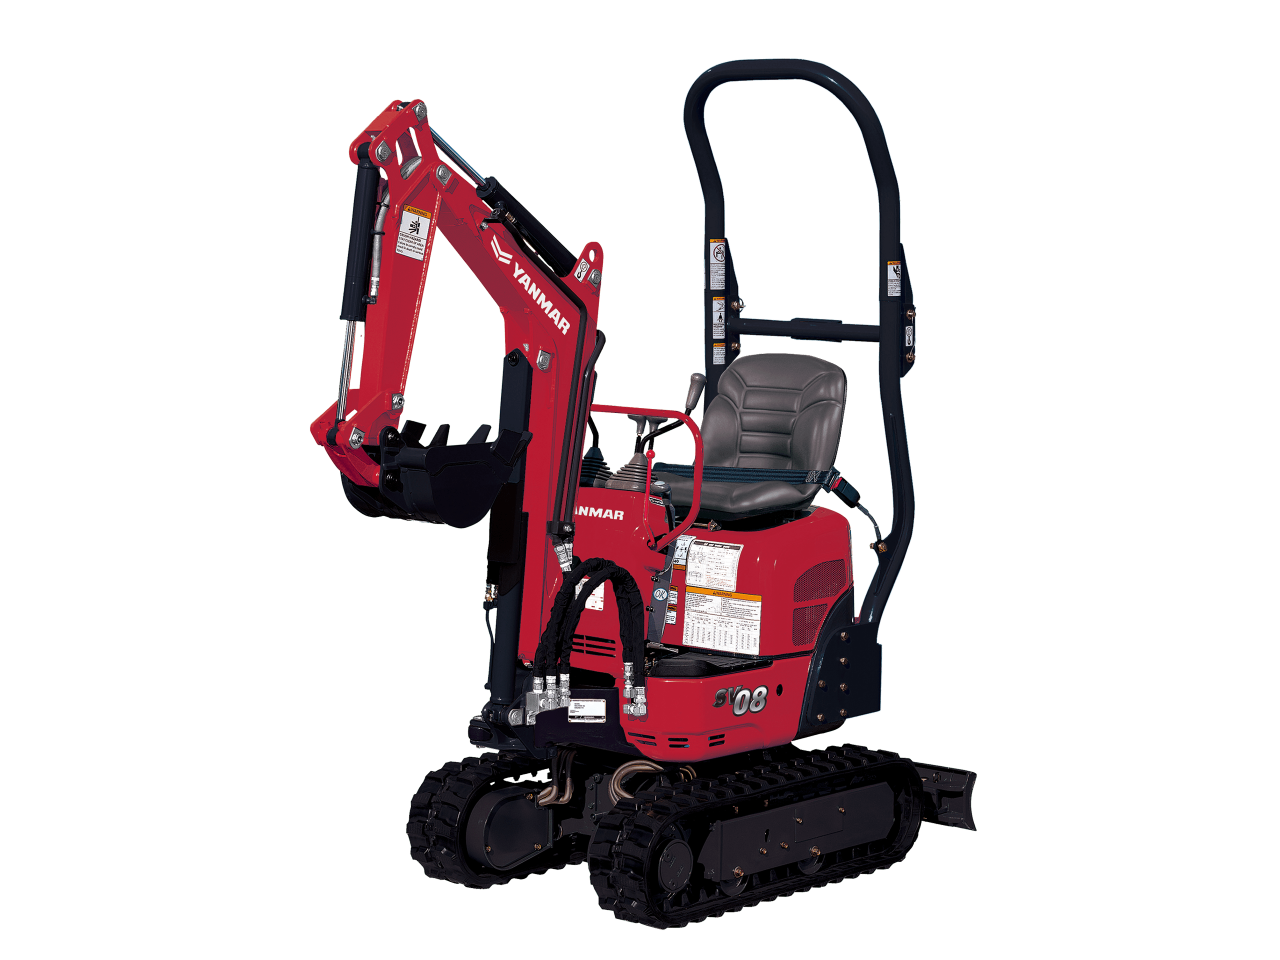 Ultra mini excavator for confined spaces